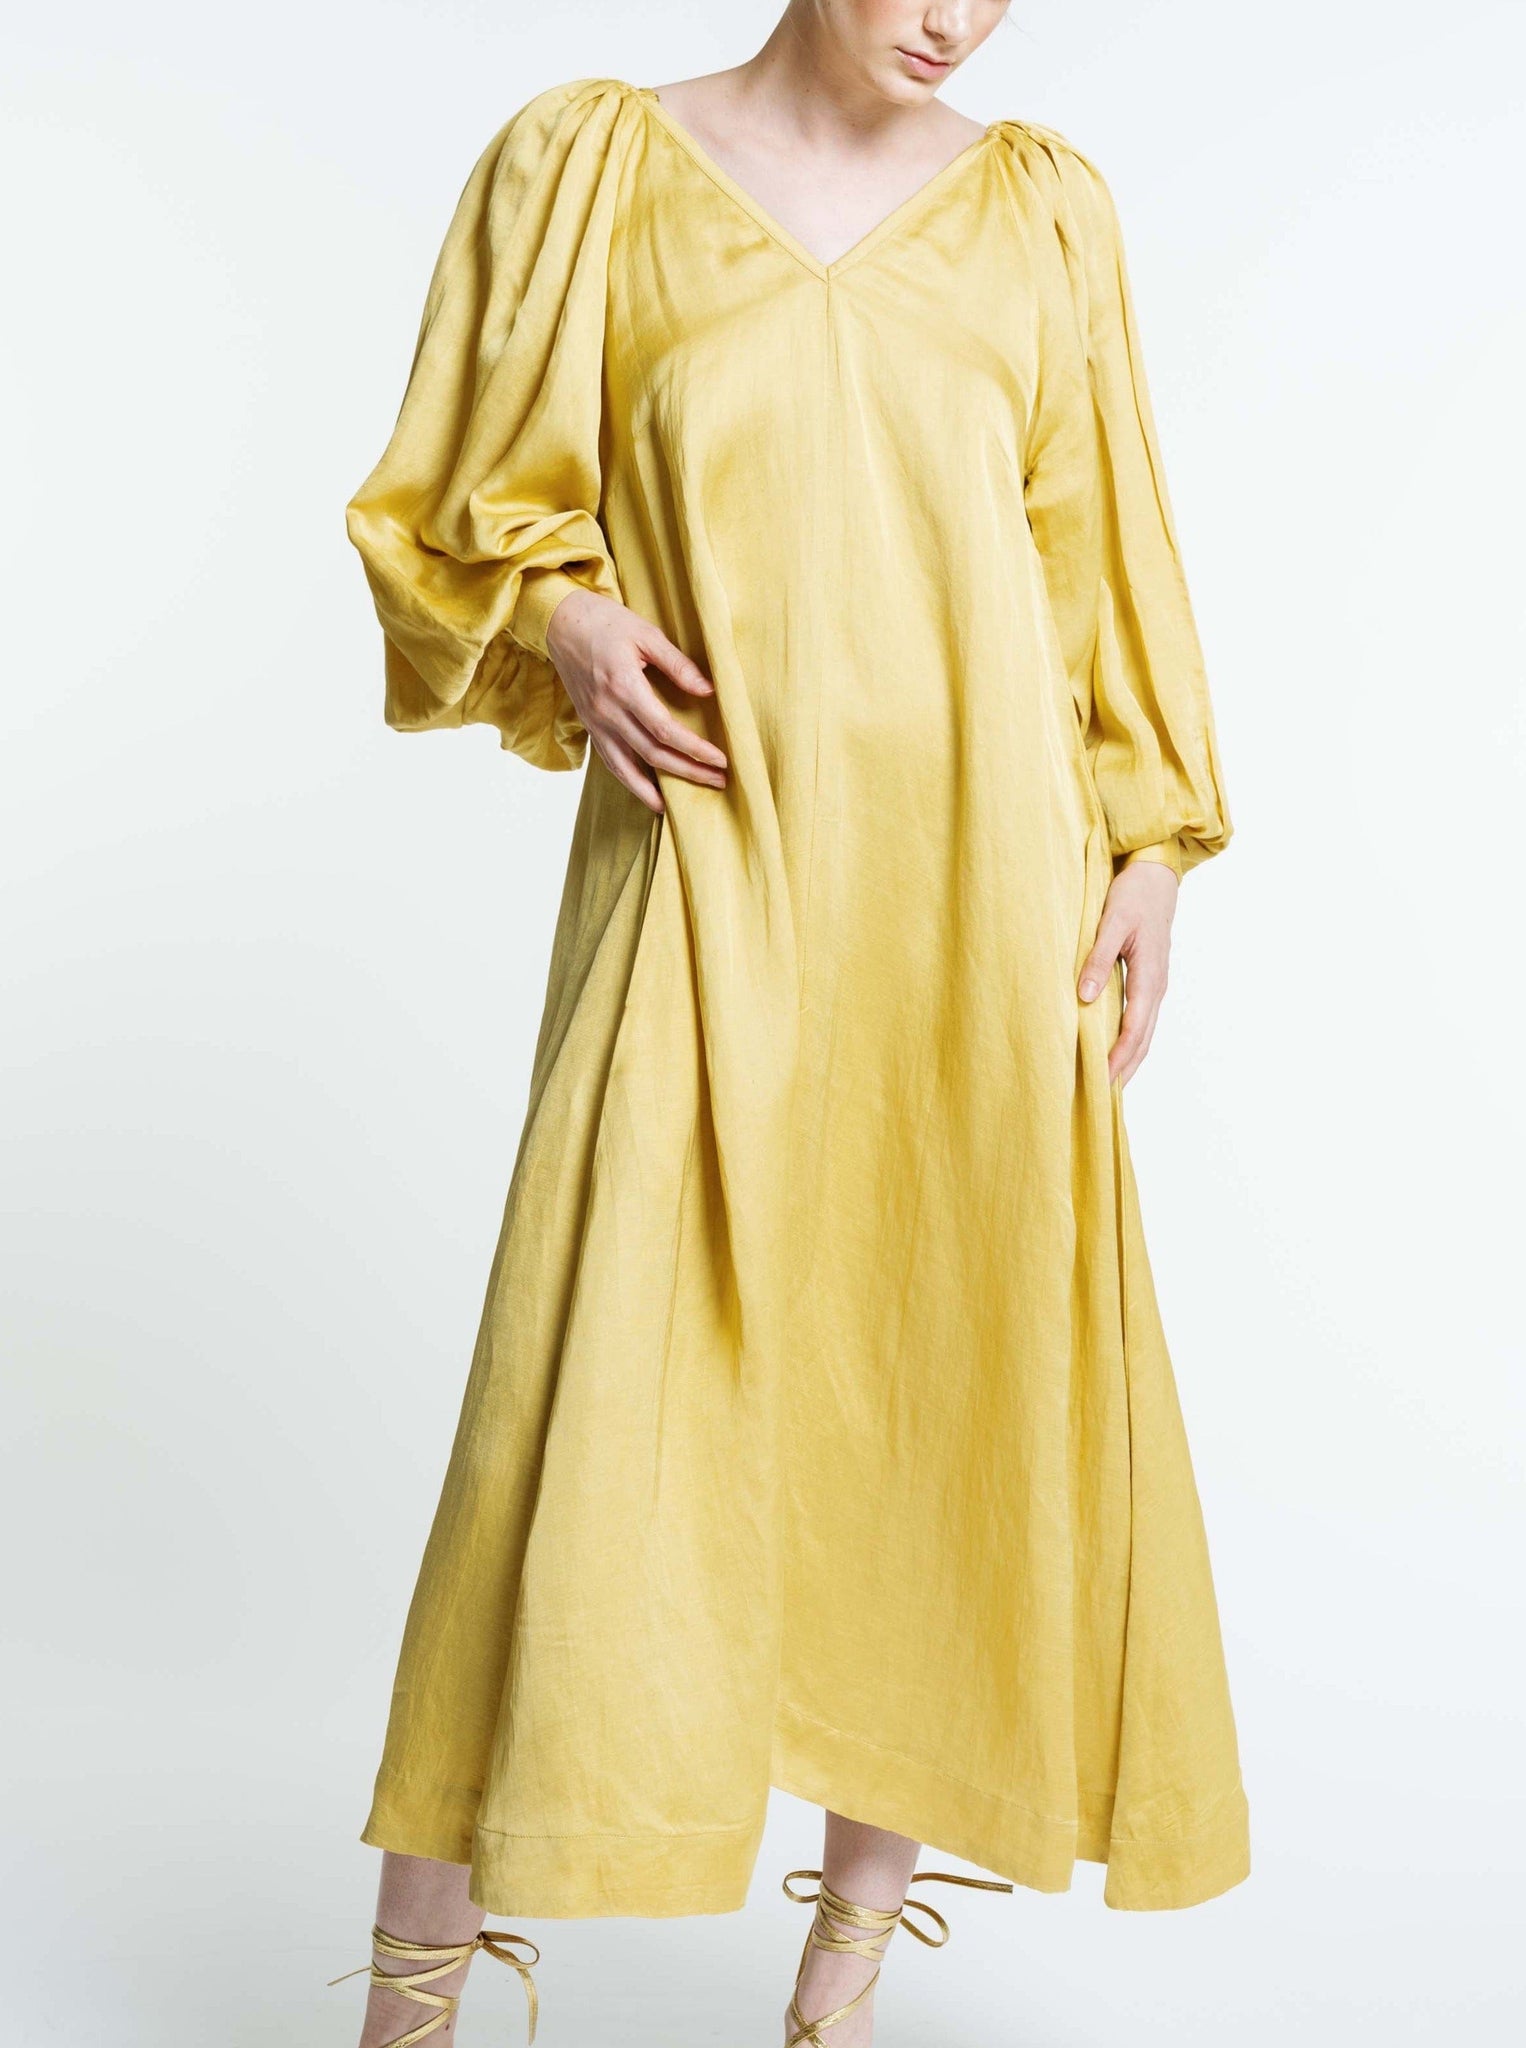 The model is wearing the Lupita Maxi Dress - Citrine with sleeve cuffs.